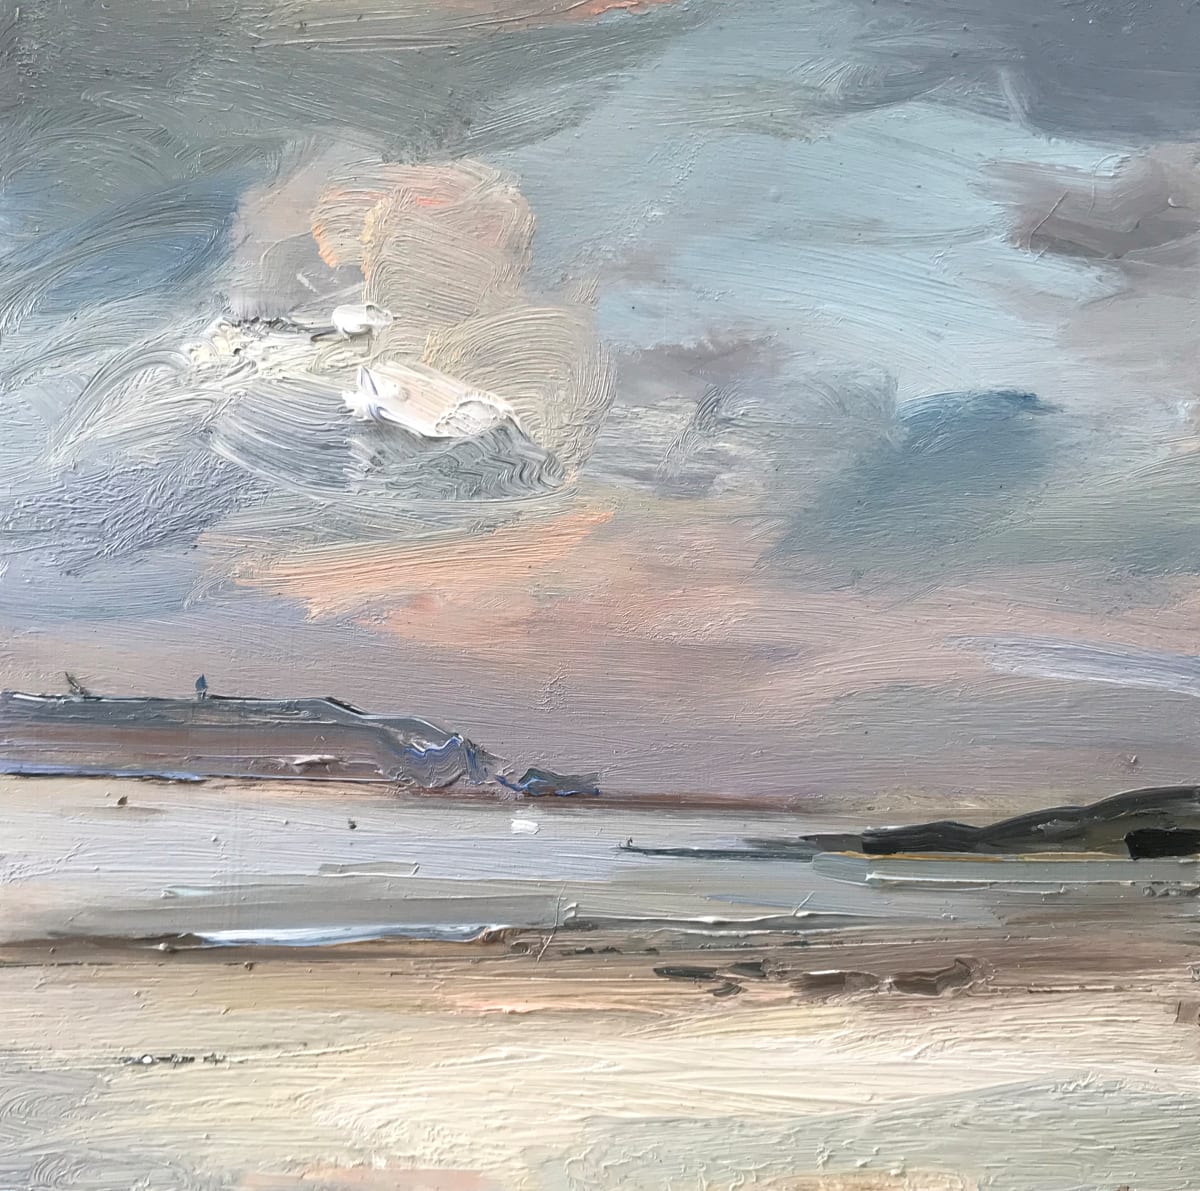 Late in the Day at Daymer by David Atkins | Artwork Archive